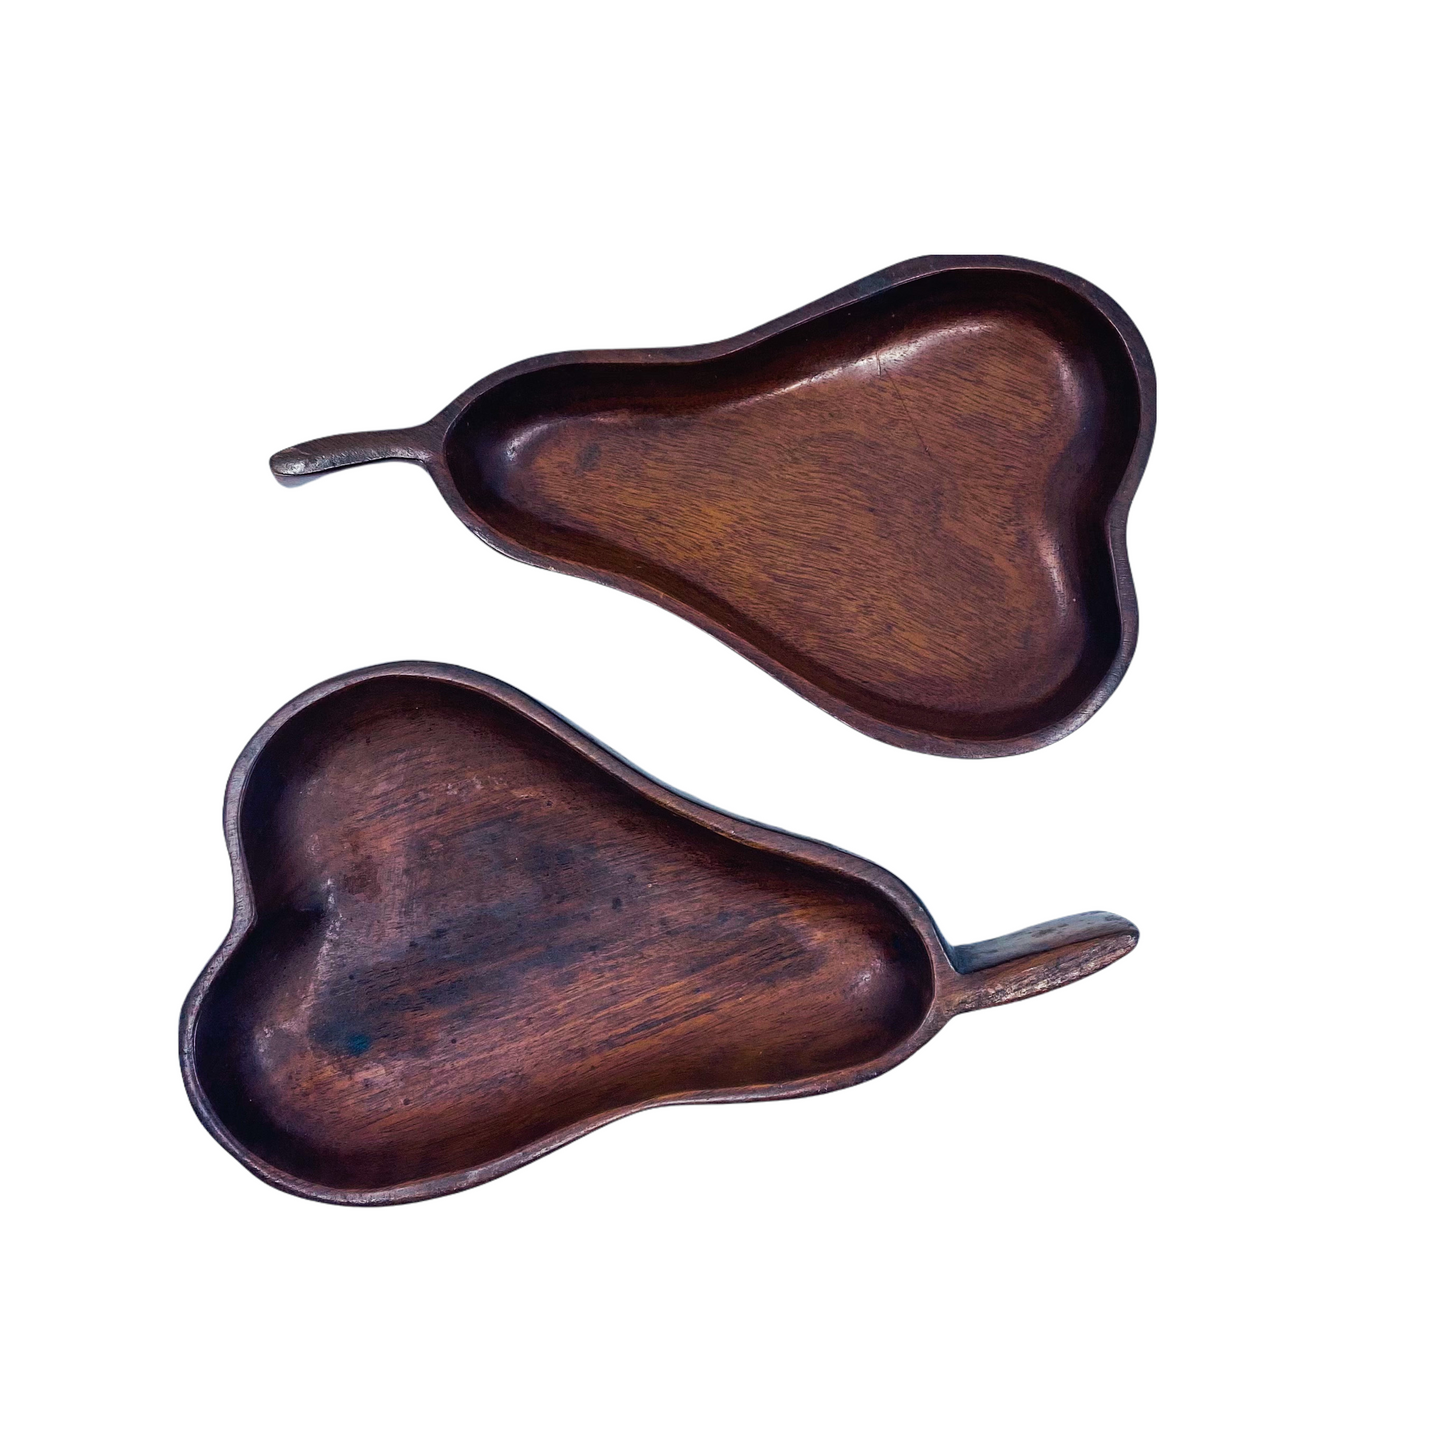 A Pair of Pear Shaped Wood Dishes